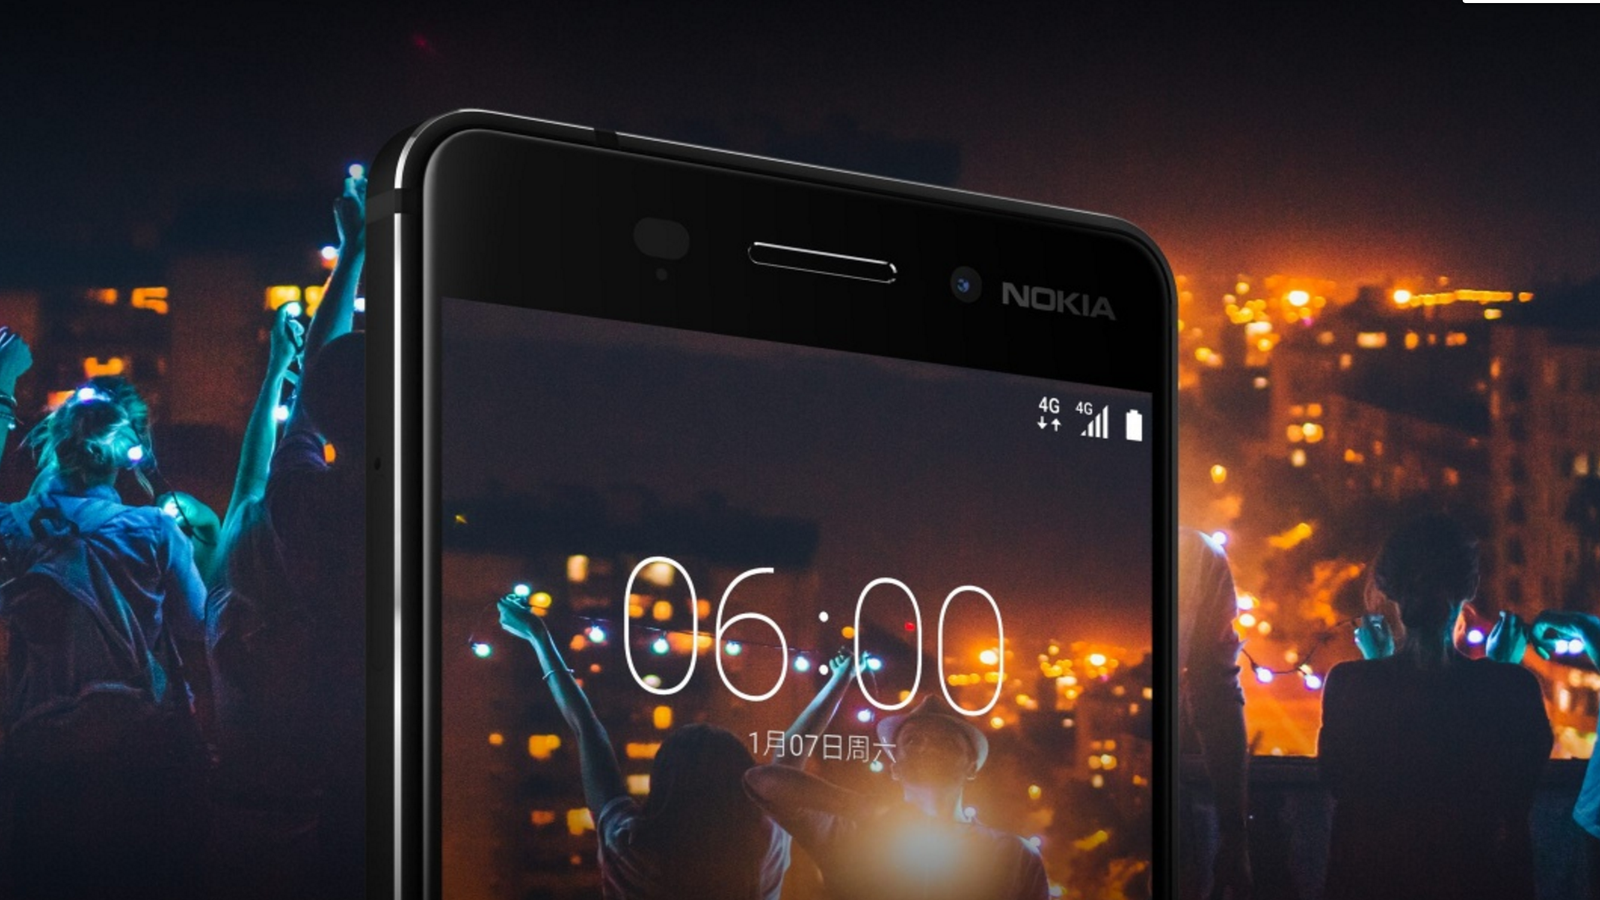 Nokia 6 out in the US in July, will cost 229 dollars